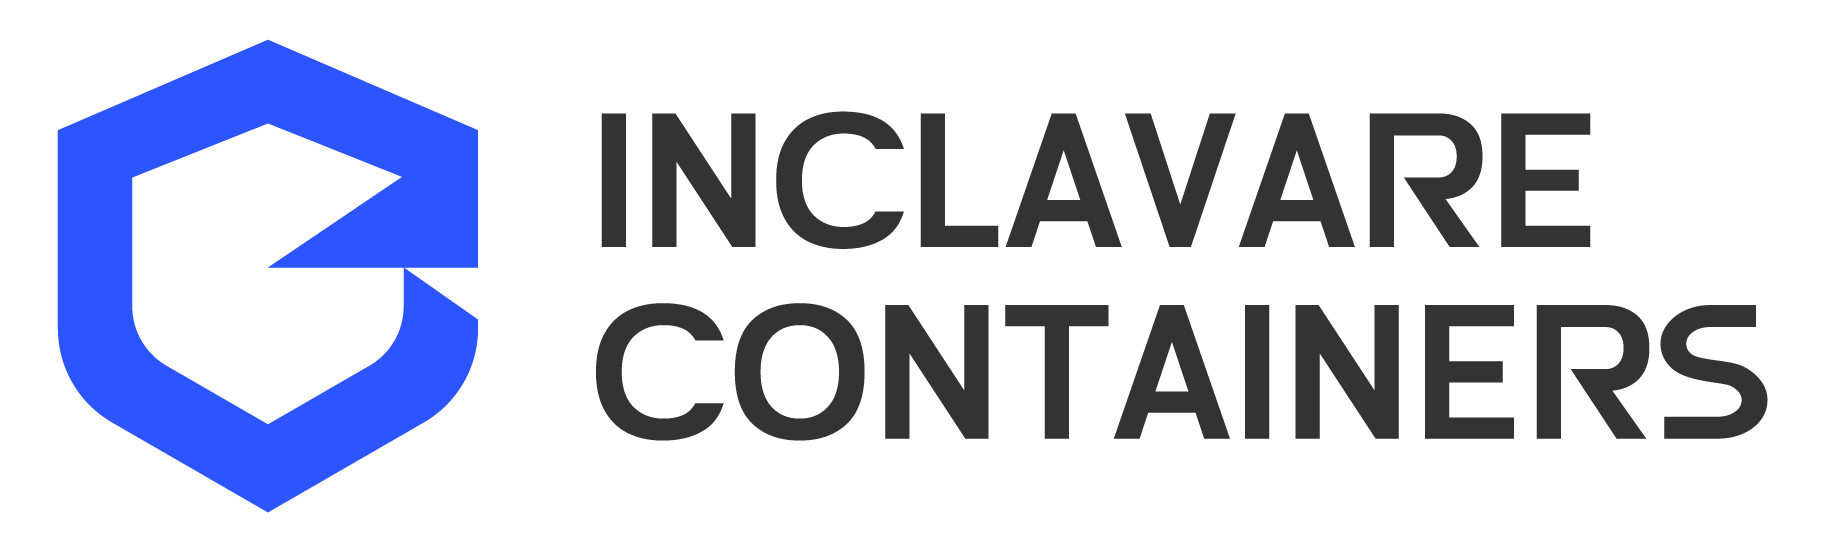 inclavare-containers